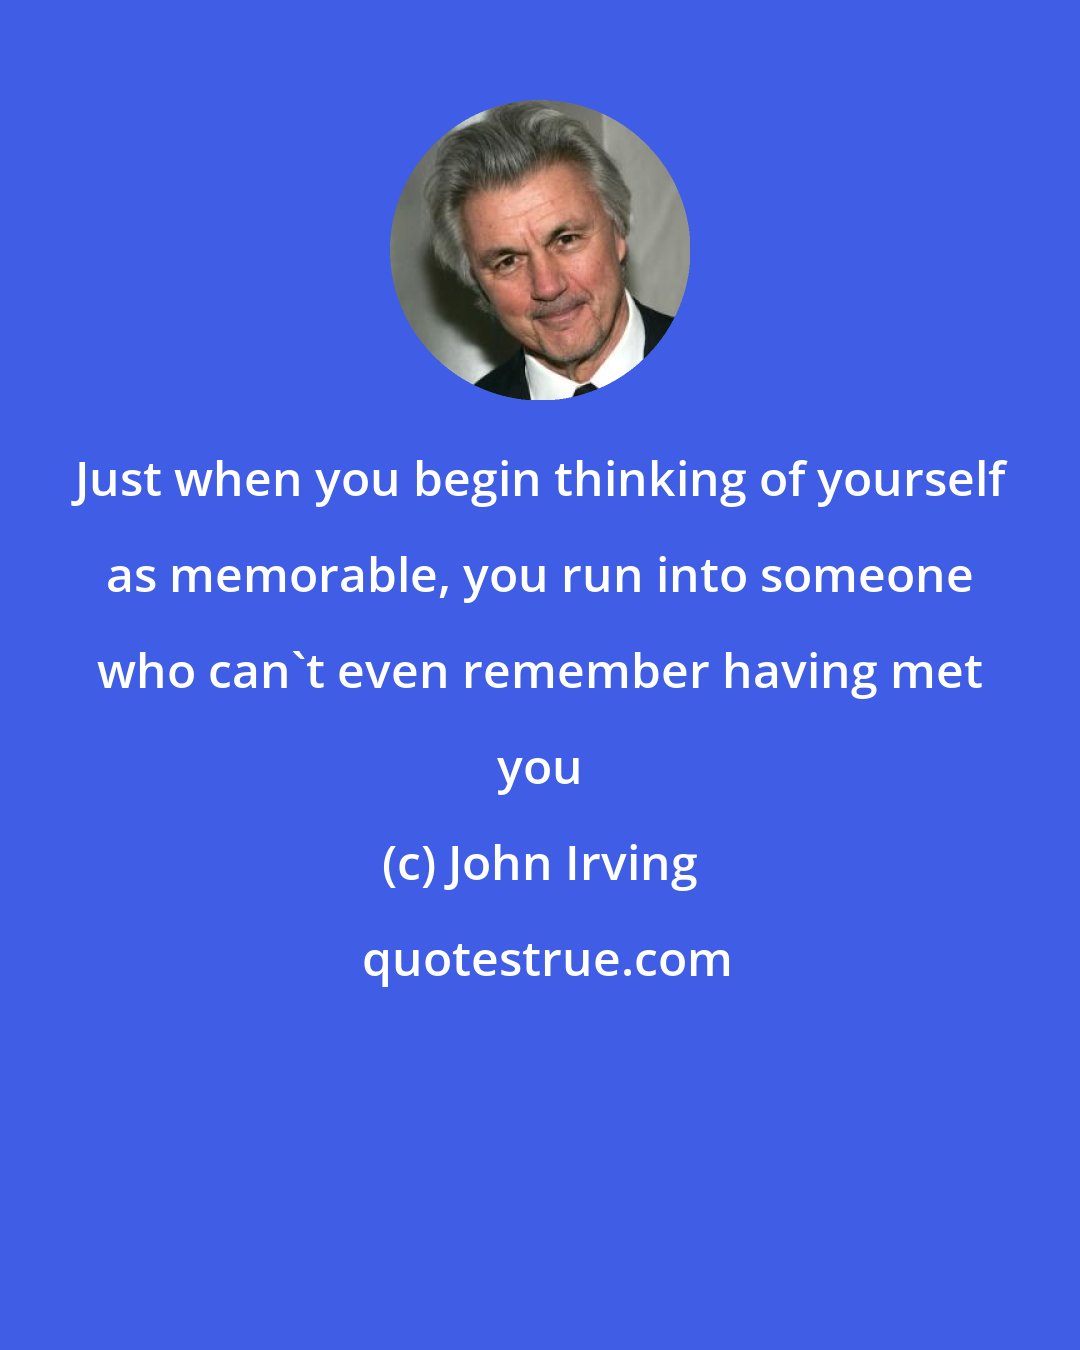 John Irving: Just when you begin thinking of yourself as memorable, you run into someone who can't even remember having met you